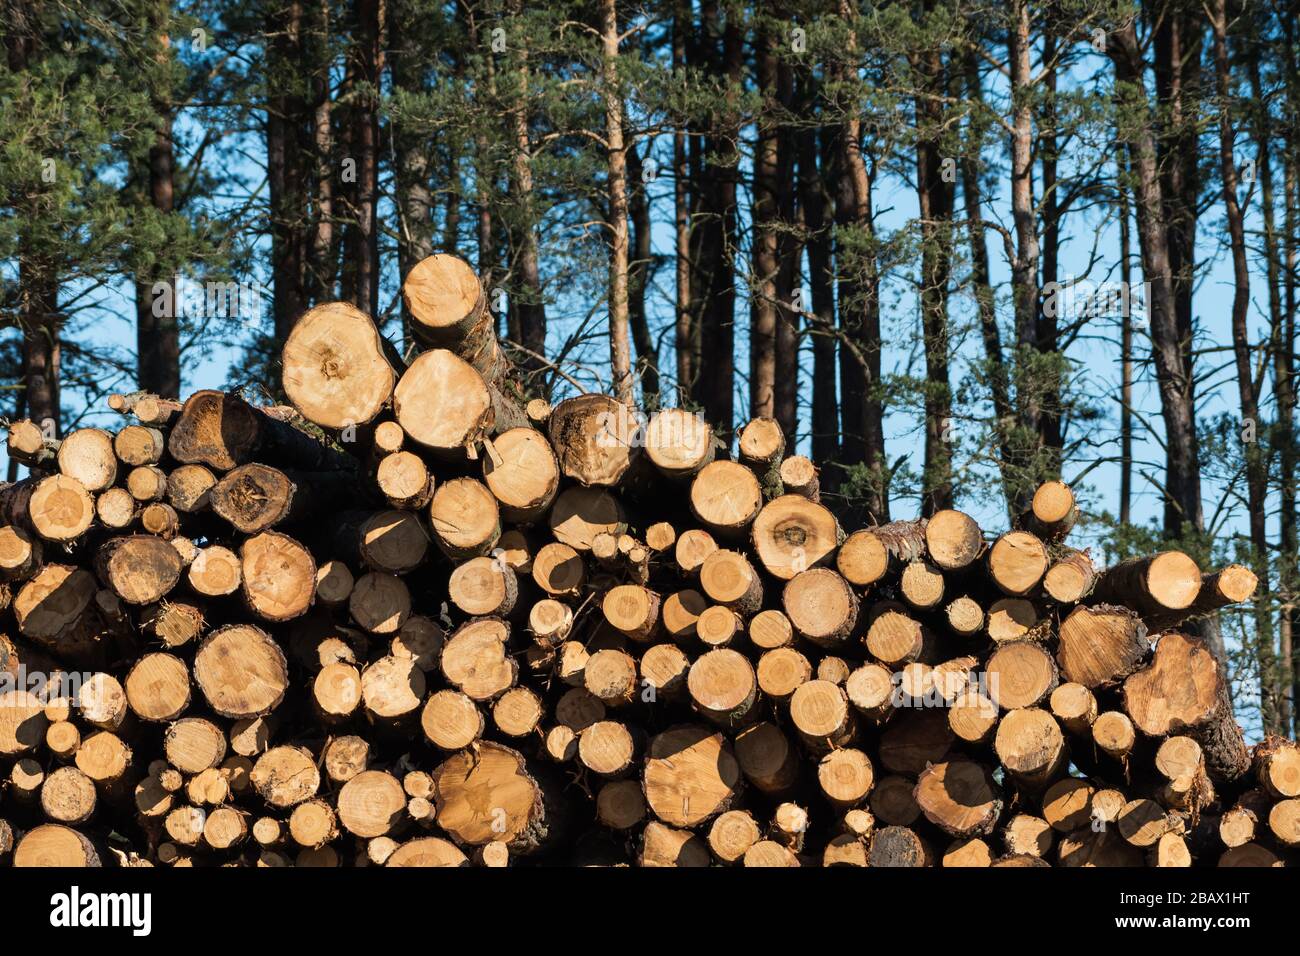 Stacked pulpwood biomass  in a pine tree forest Stock Photo